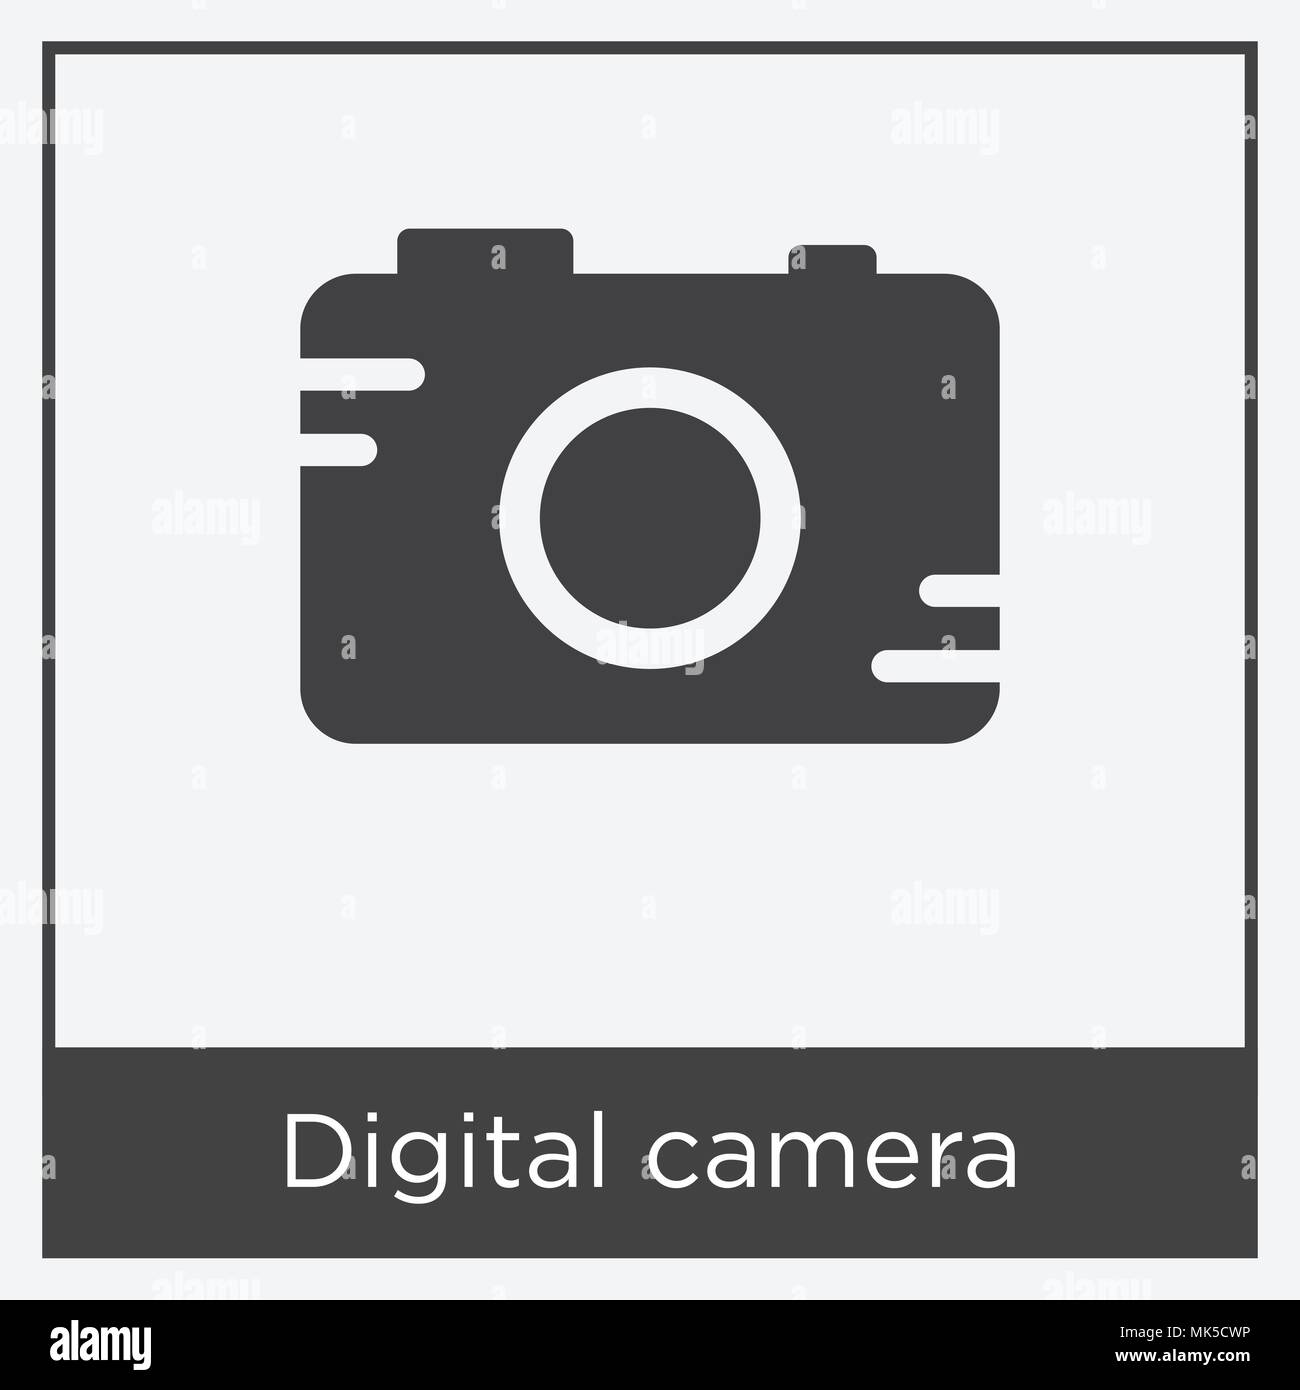 Digital camera icon isolated on white background with gray frame, sign and symbol Stock Vector